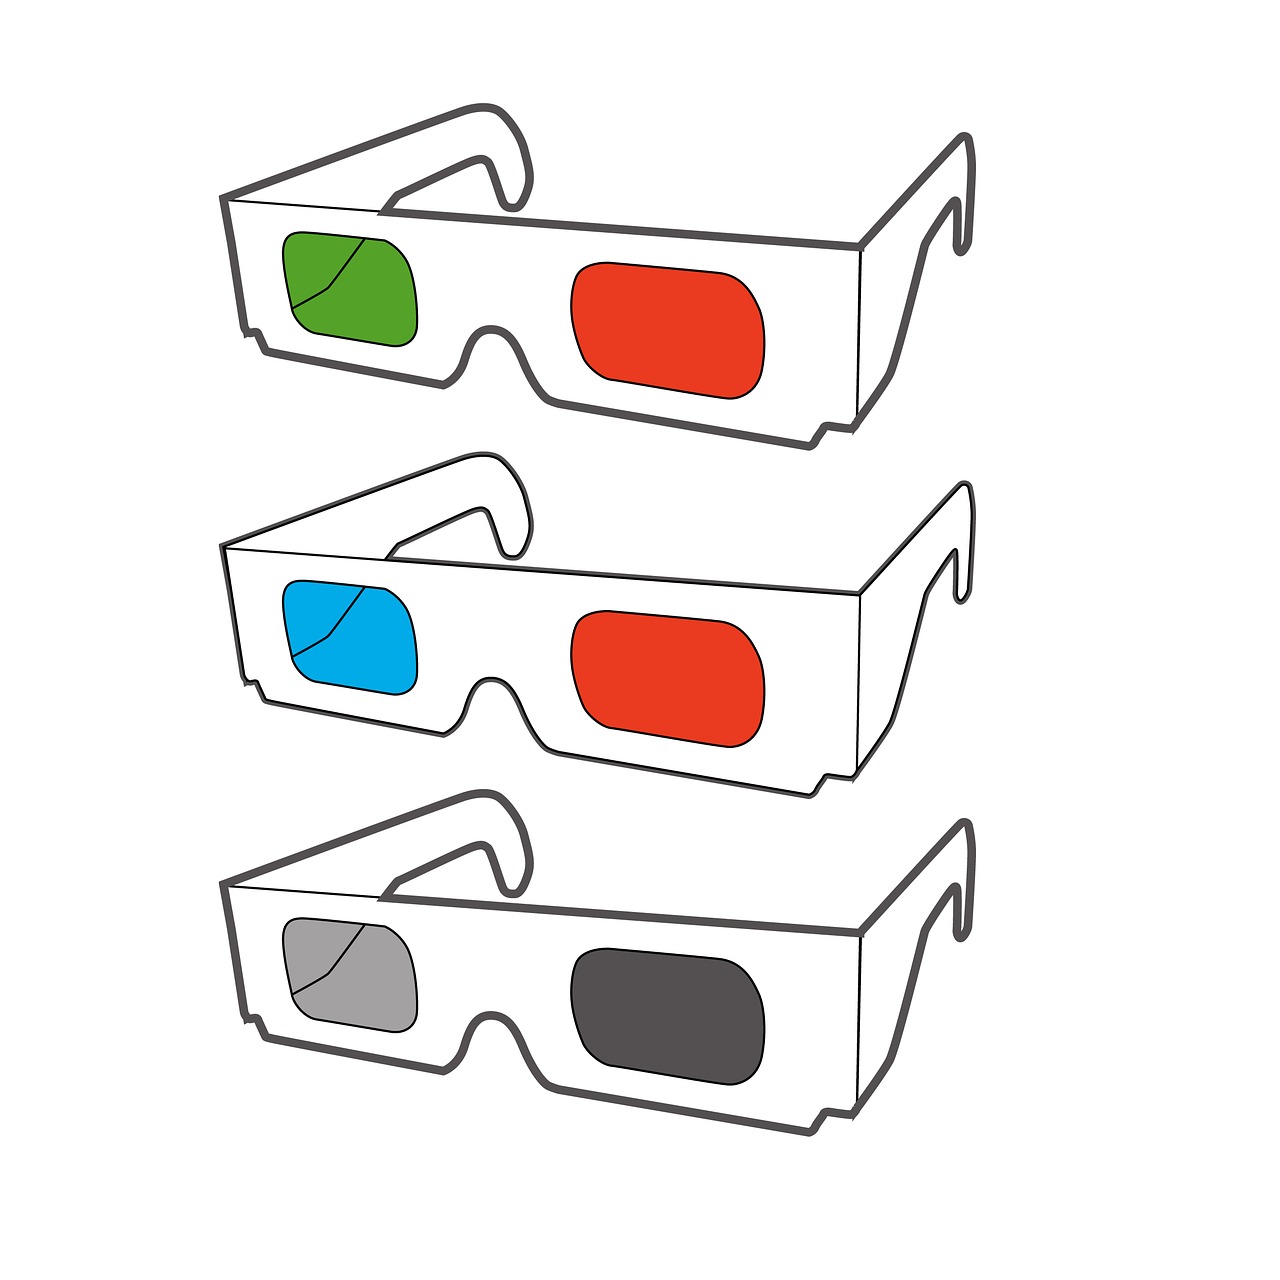 anaglyph 3d 3d glasses free photo